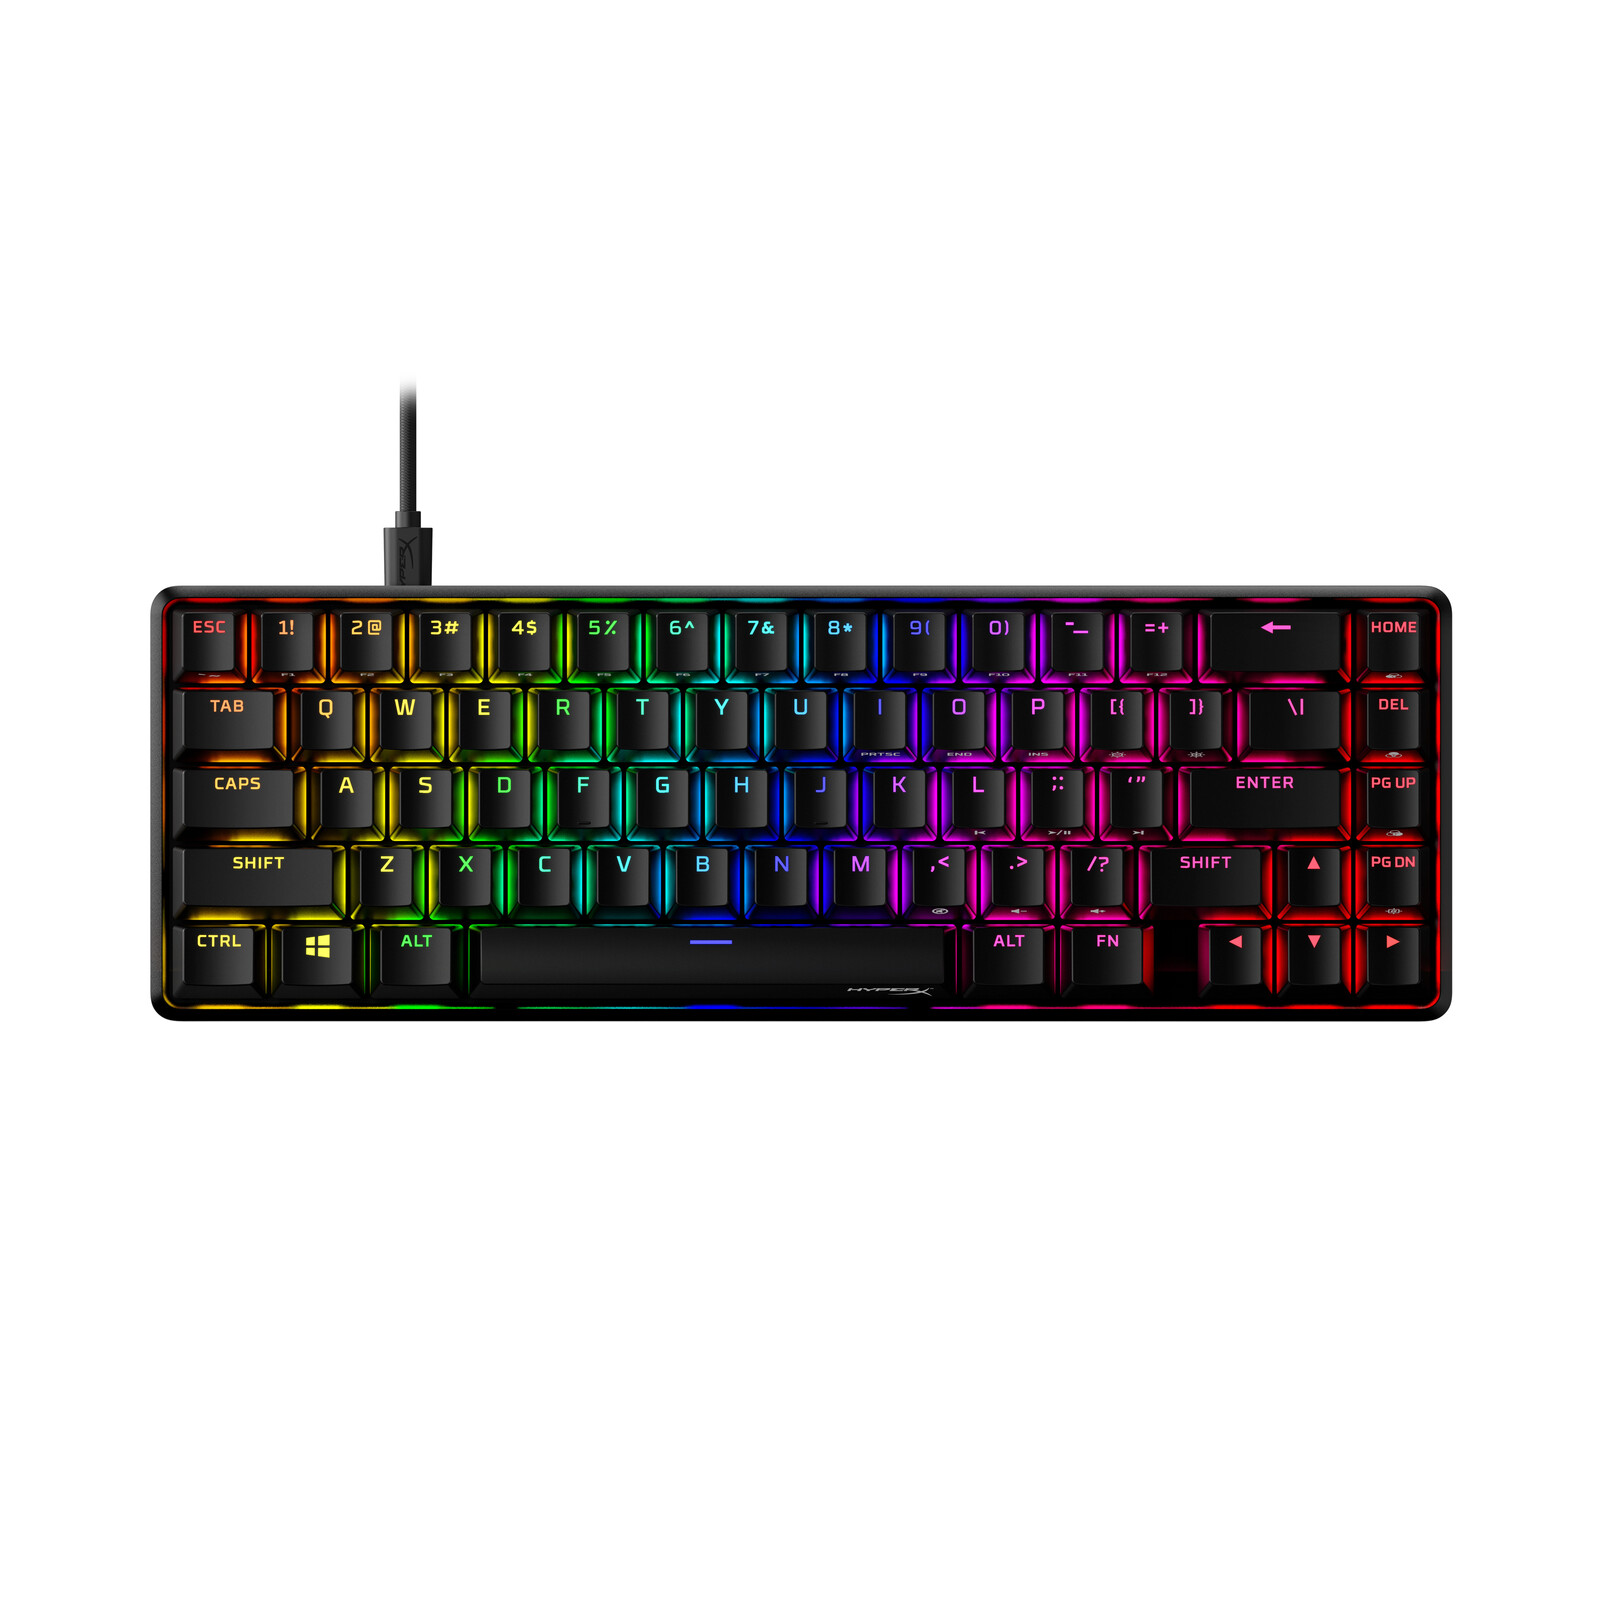 streng Verdampen Verraad HyperX Alloy Origins 65 Mechanical Gaming Keyboard: 65% gaming keyboard  launched with double shot PBT keycaps for US$99.99 - NotebookCheck.net News